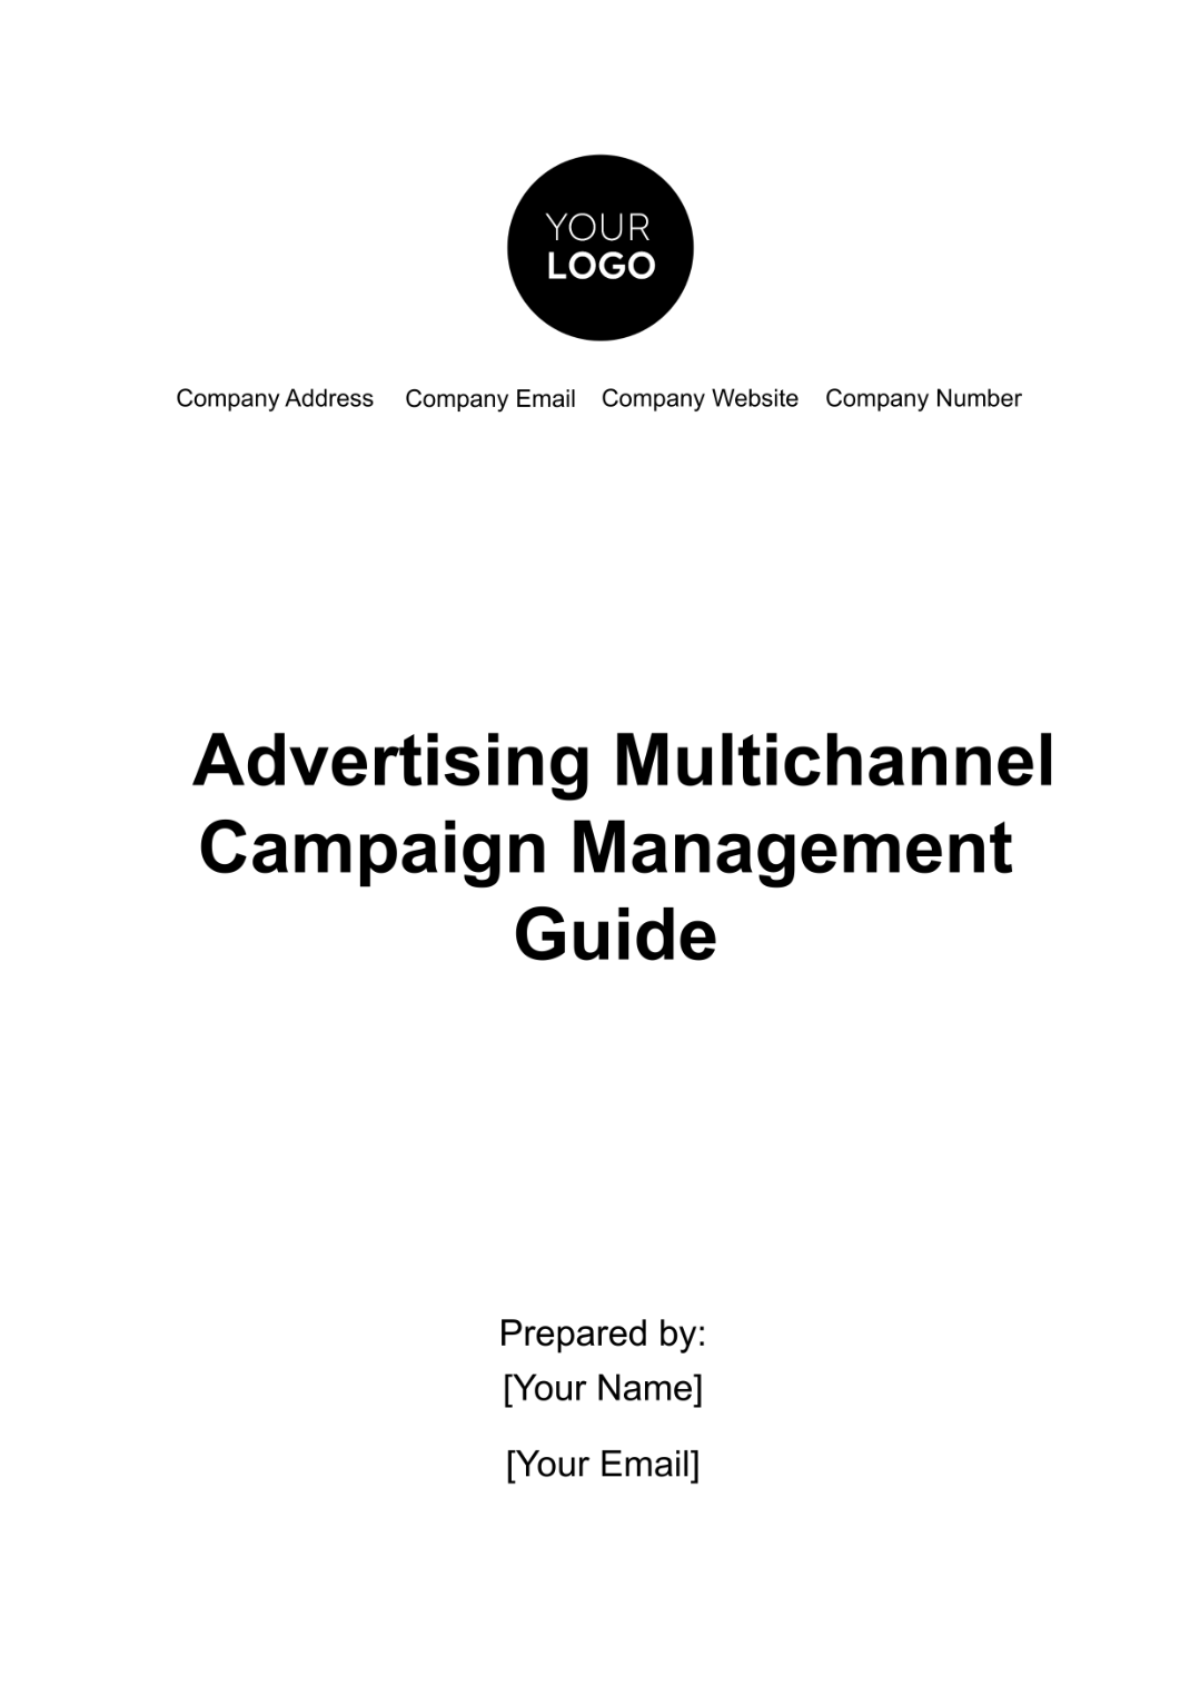 Advertising Multichannel Campaign Management Guide Template